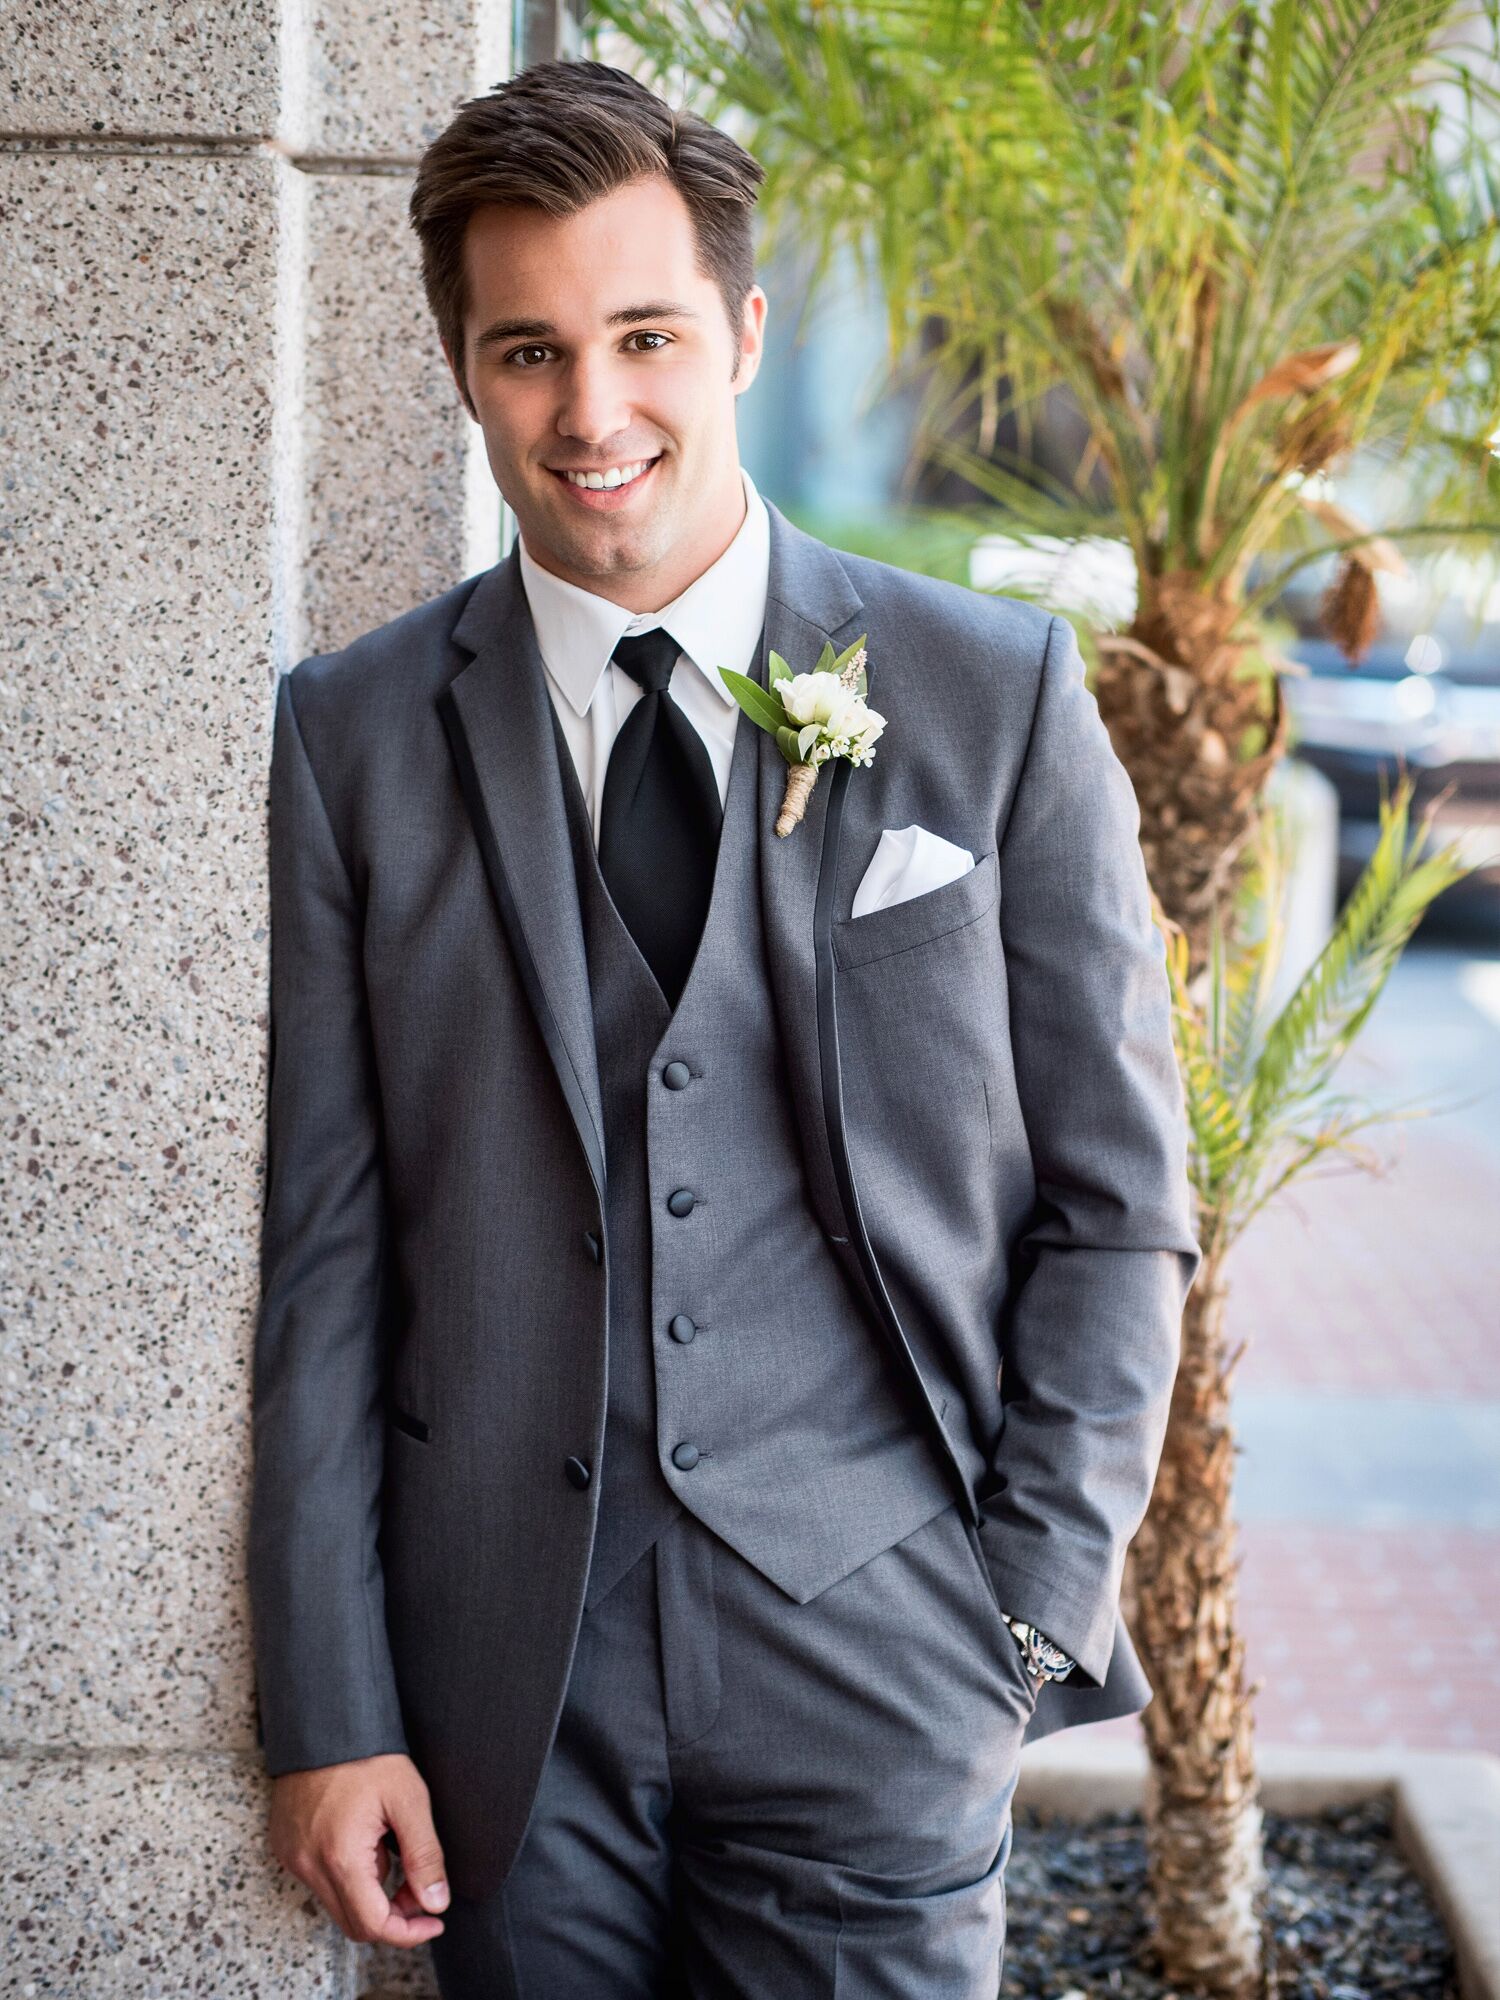 White Rose Boutonniere and Pocket Square